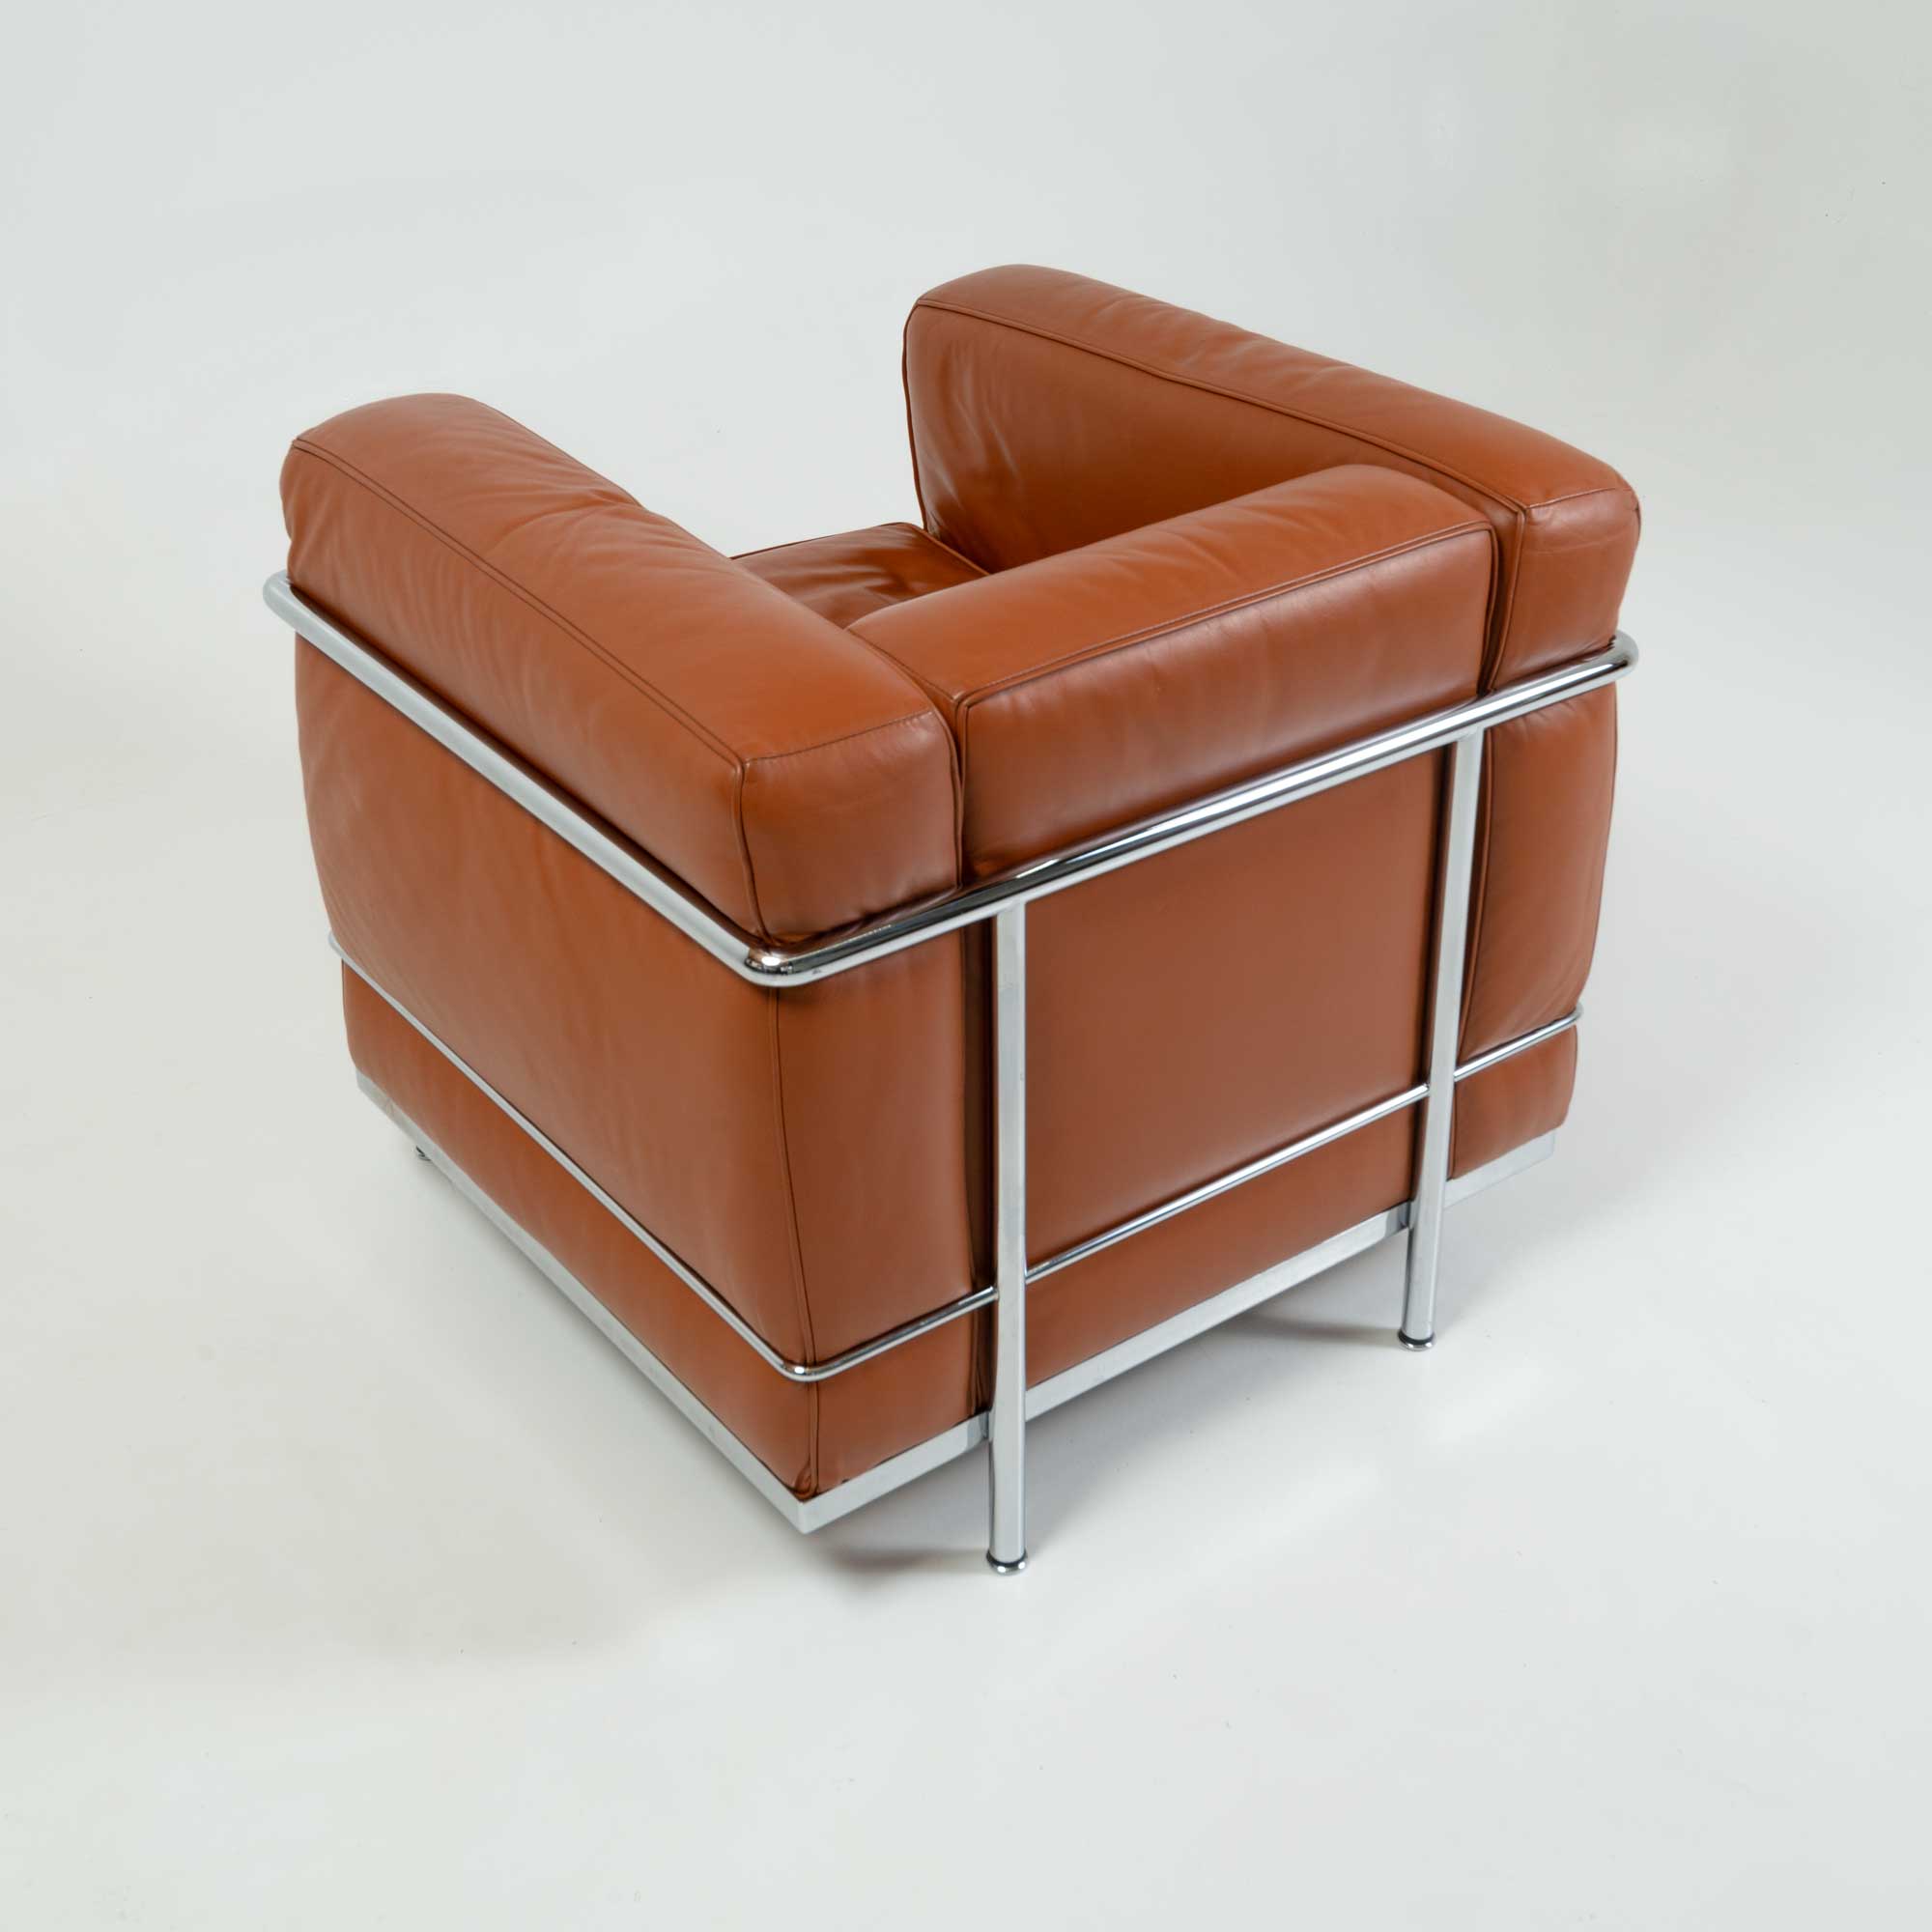 LC2 Petite Modele Armchair by Le Corbusier Cassina in Original Tobacco Leather